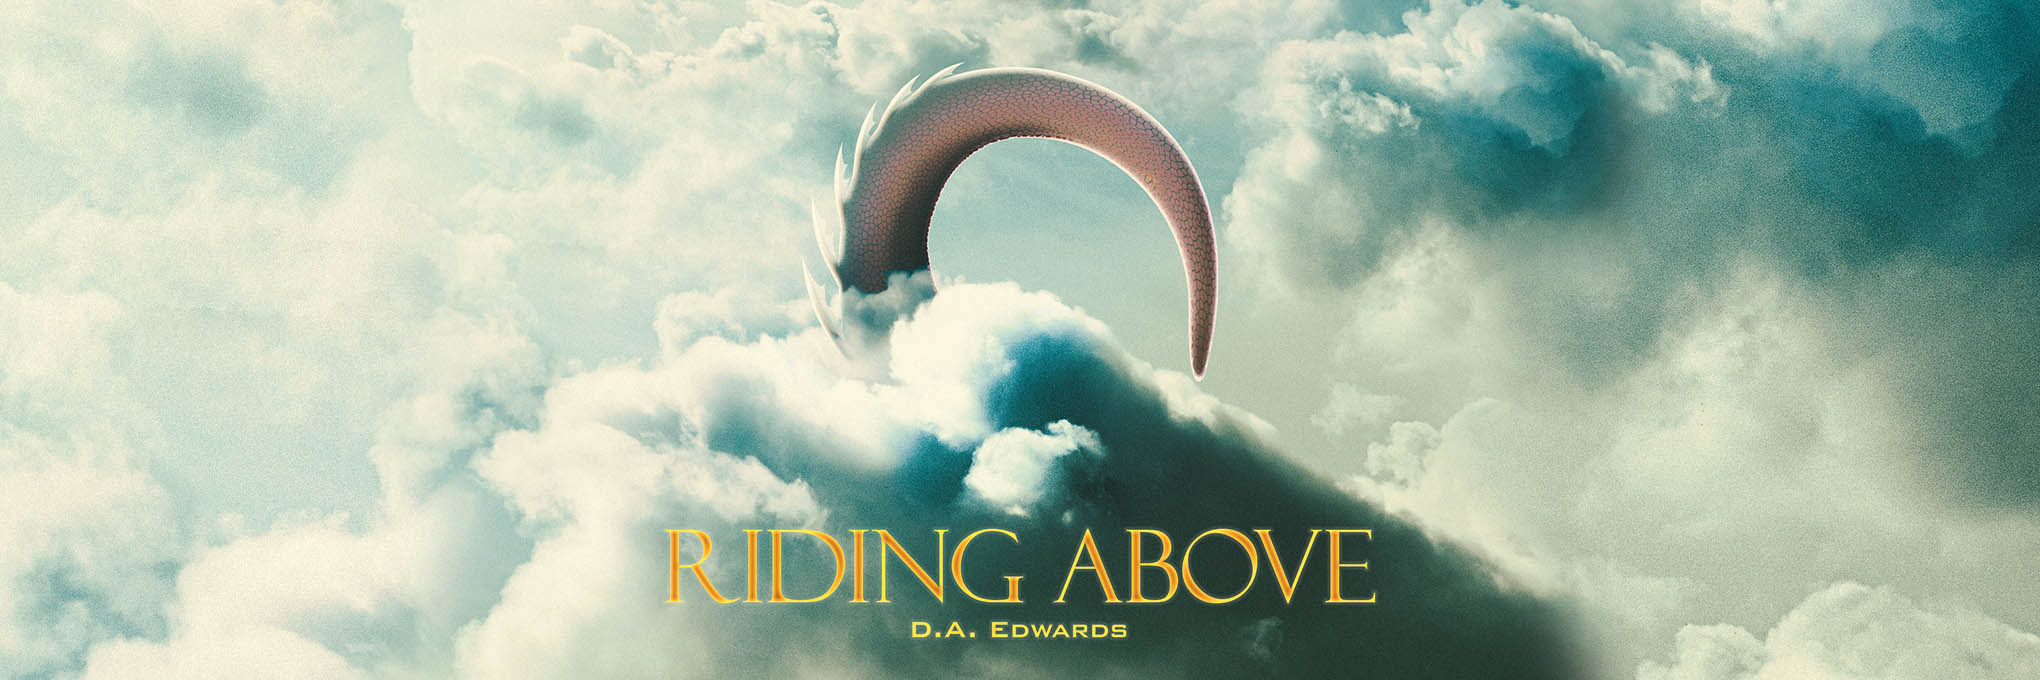 The Cover for Riding Above